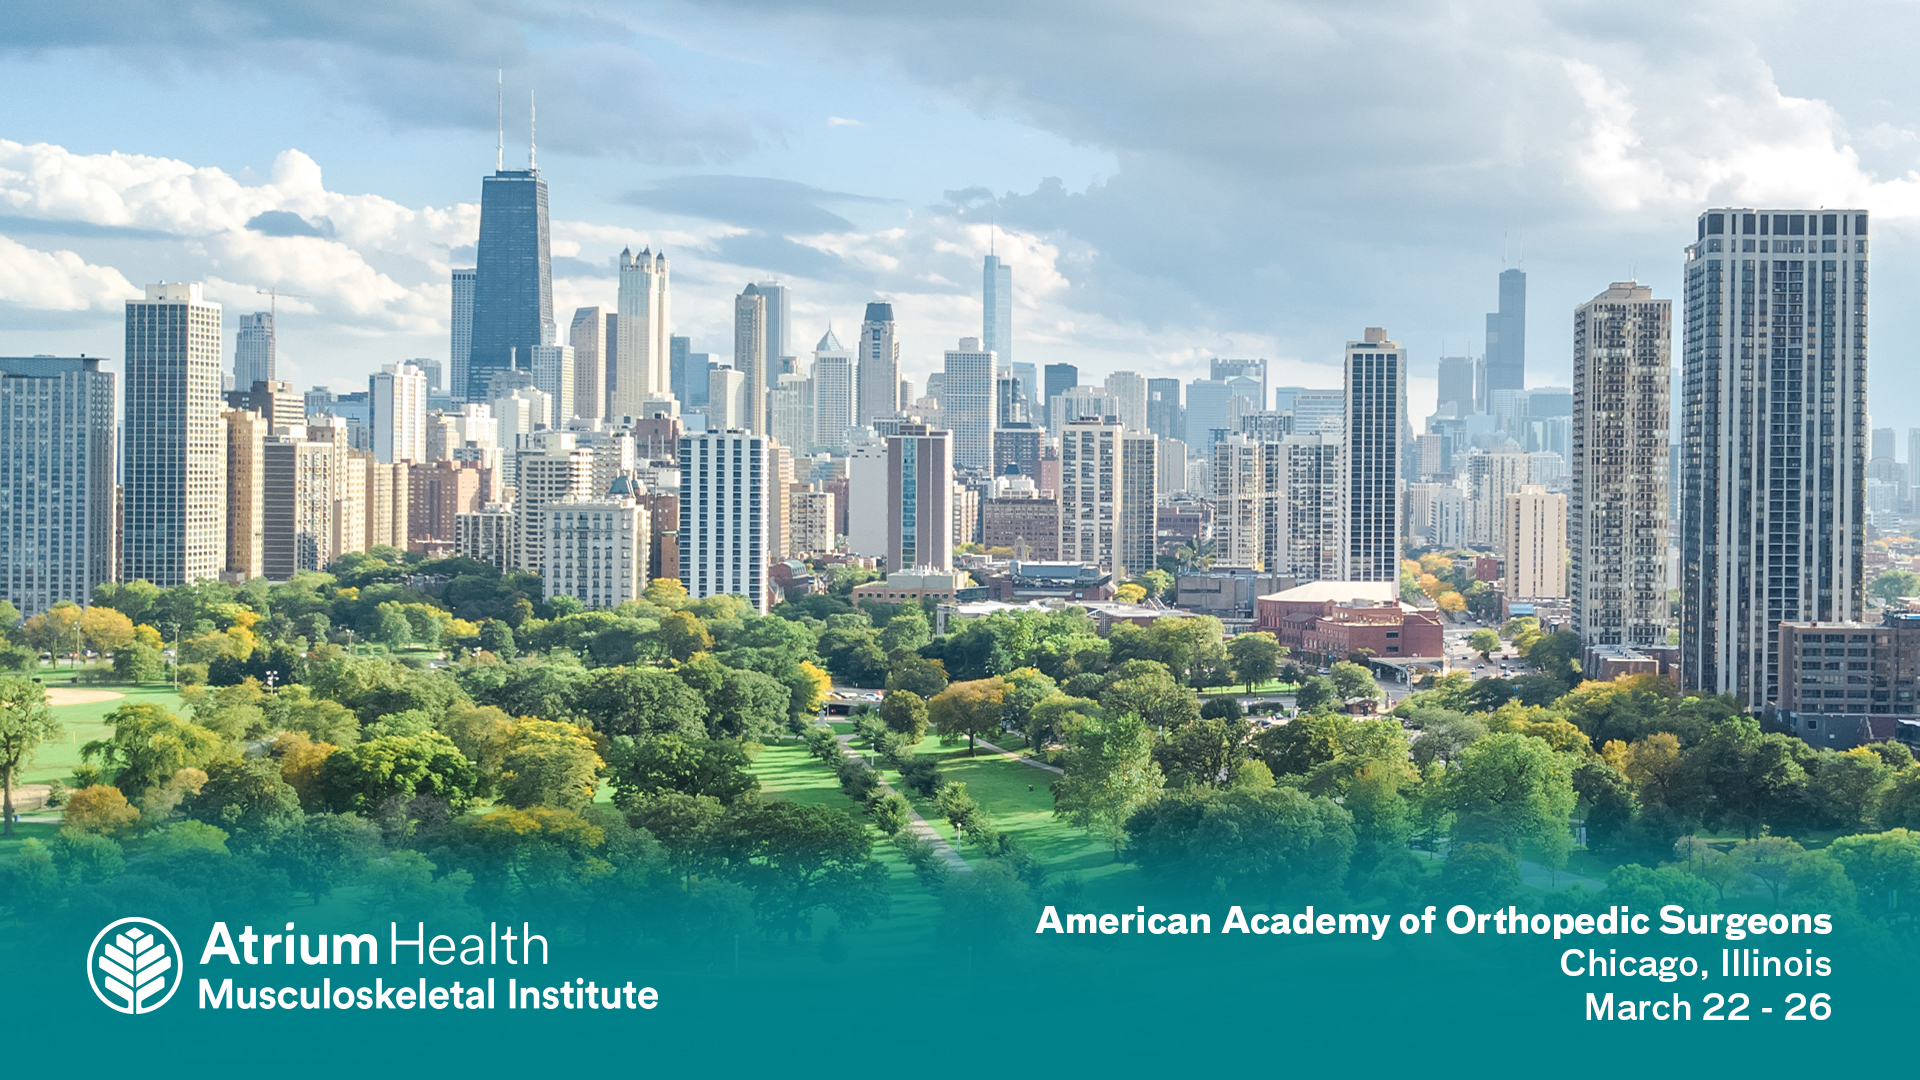 The 2022 American Academy of Orthopaedic Surgeons (AAOS) Annual Meeting is the year’s premier orthopaedic event.